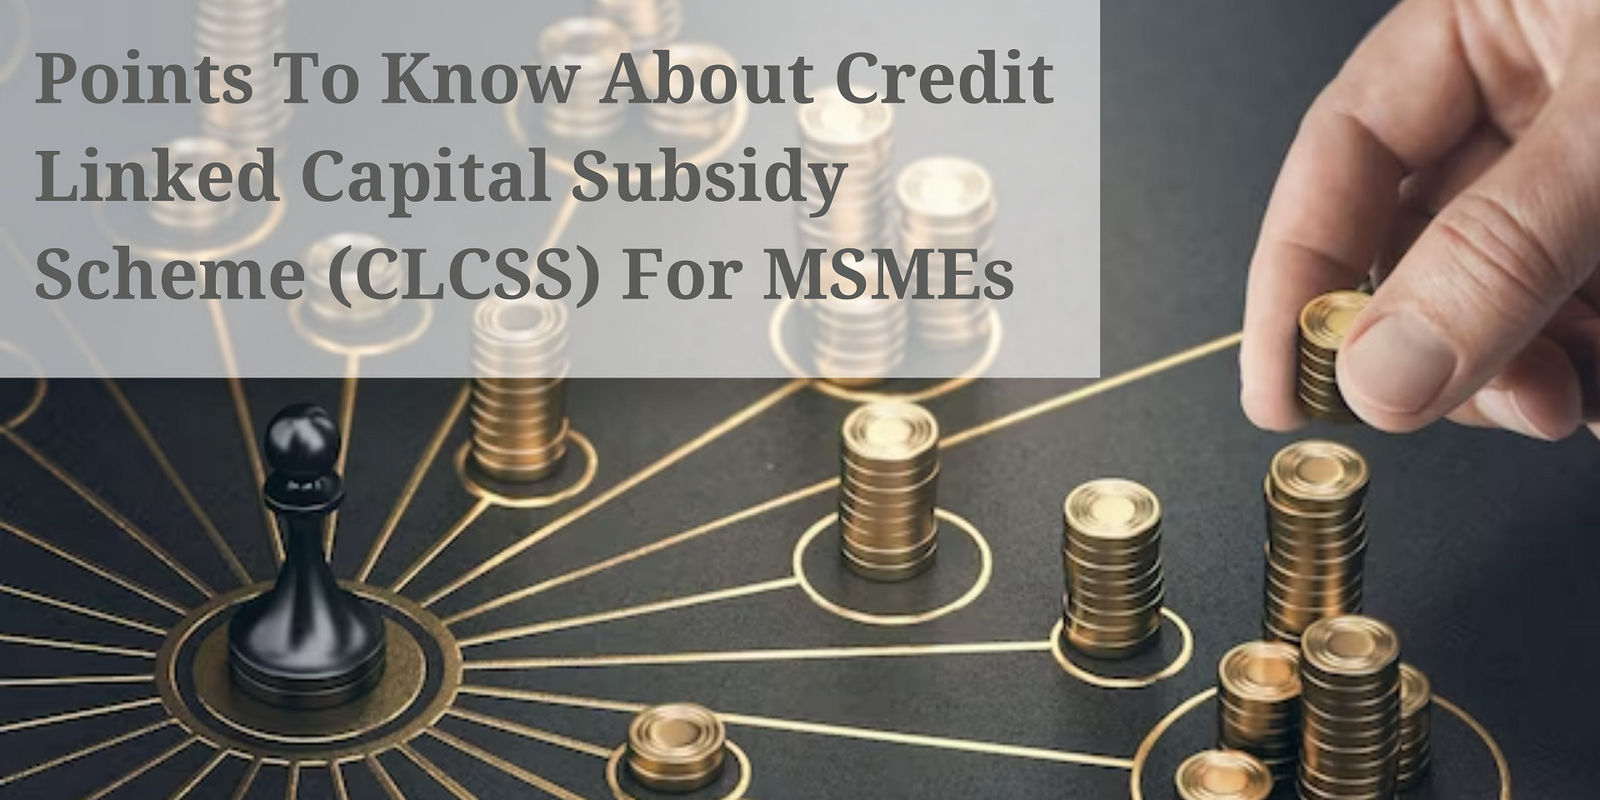 Points To Know About Credit Linked Capital Subsidy Scheme (CLCSS) For MSMEs